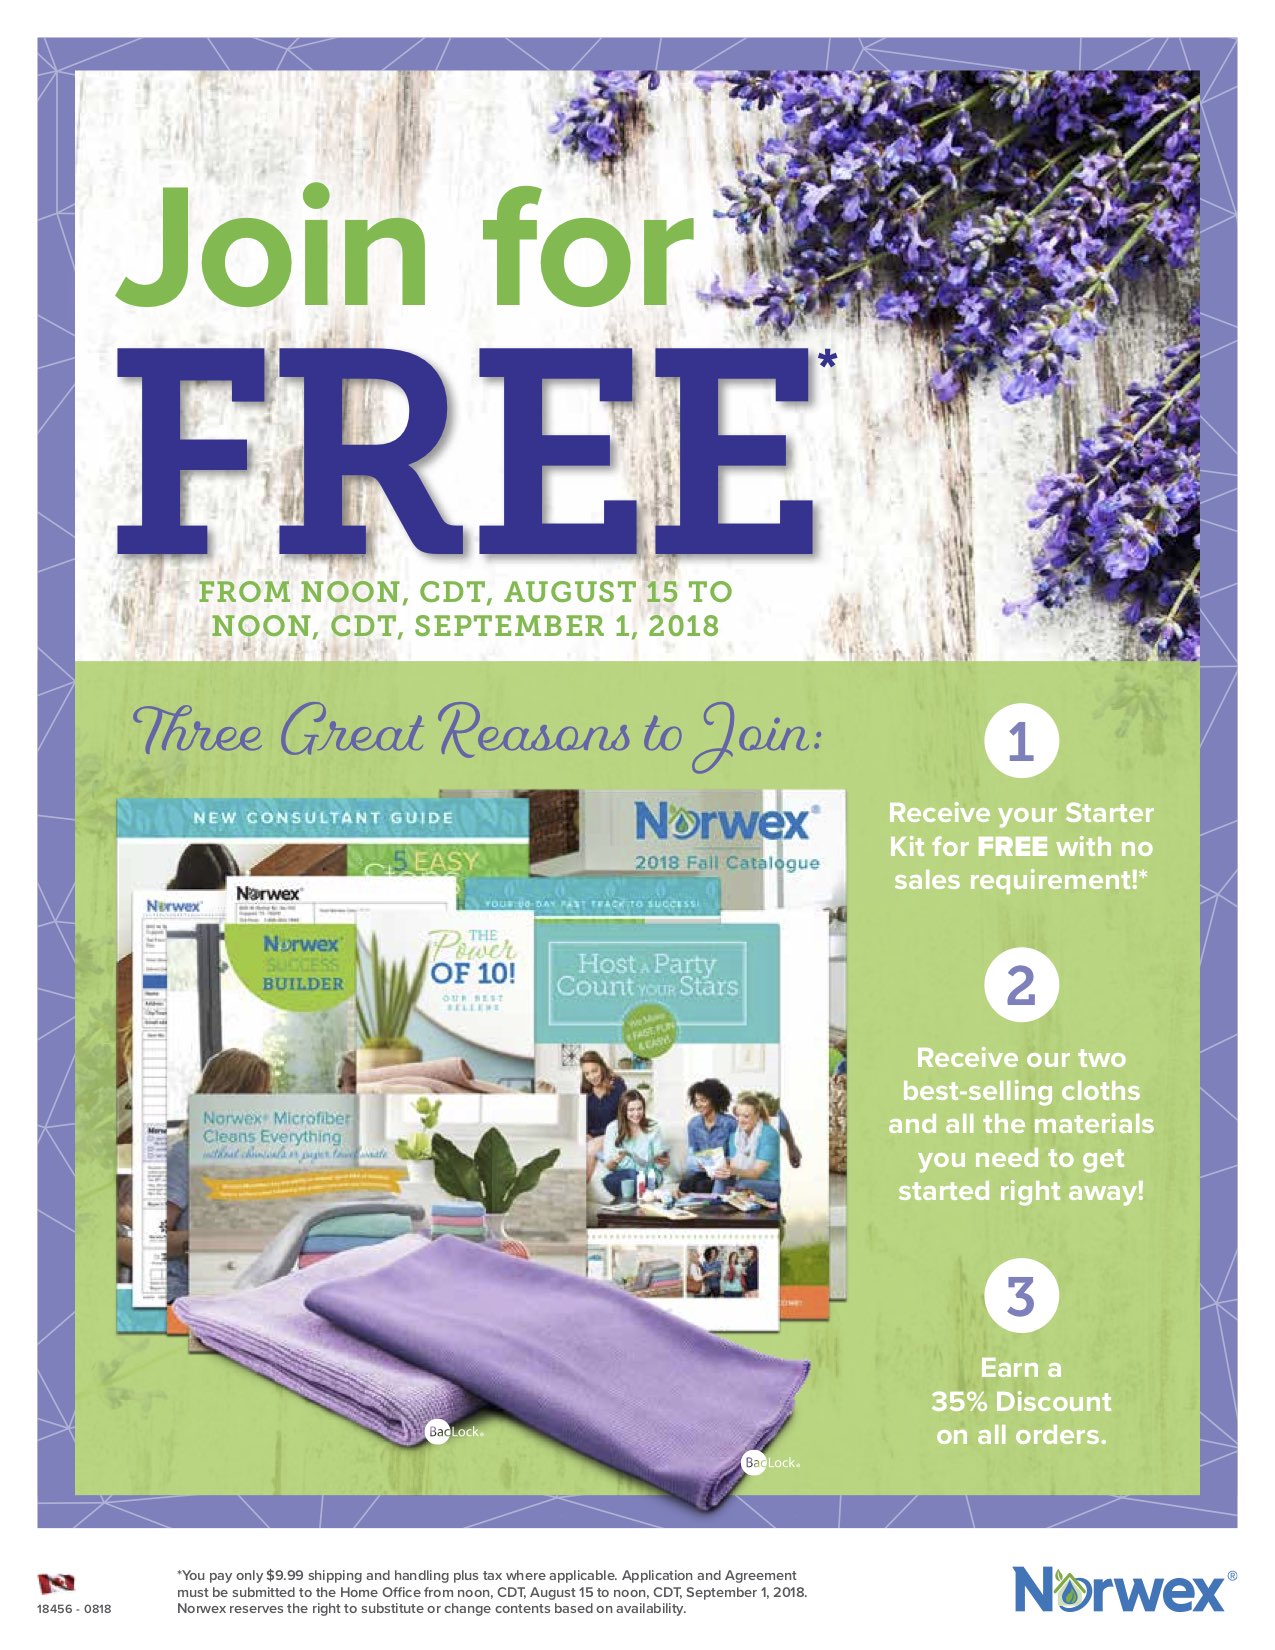 Join Norwex For FREE 